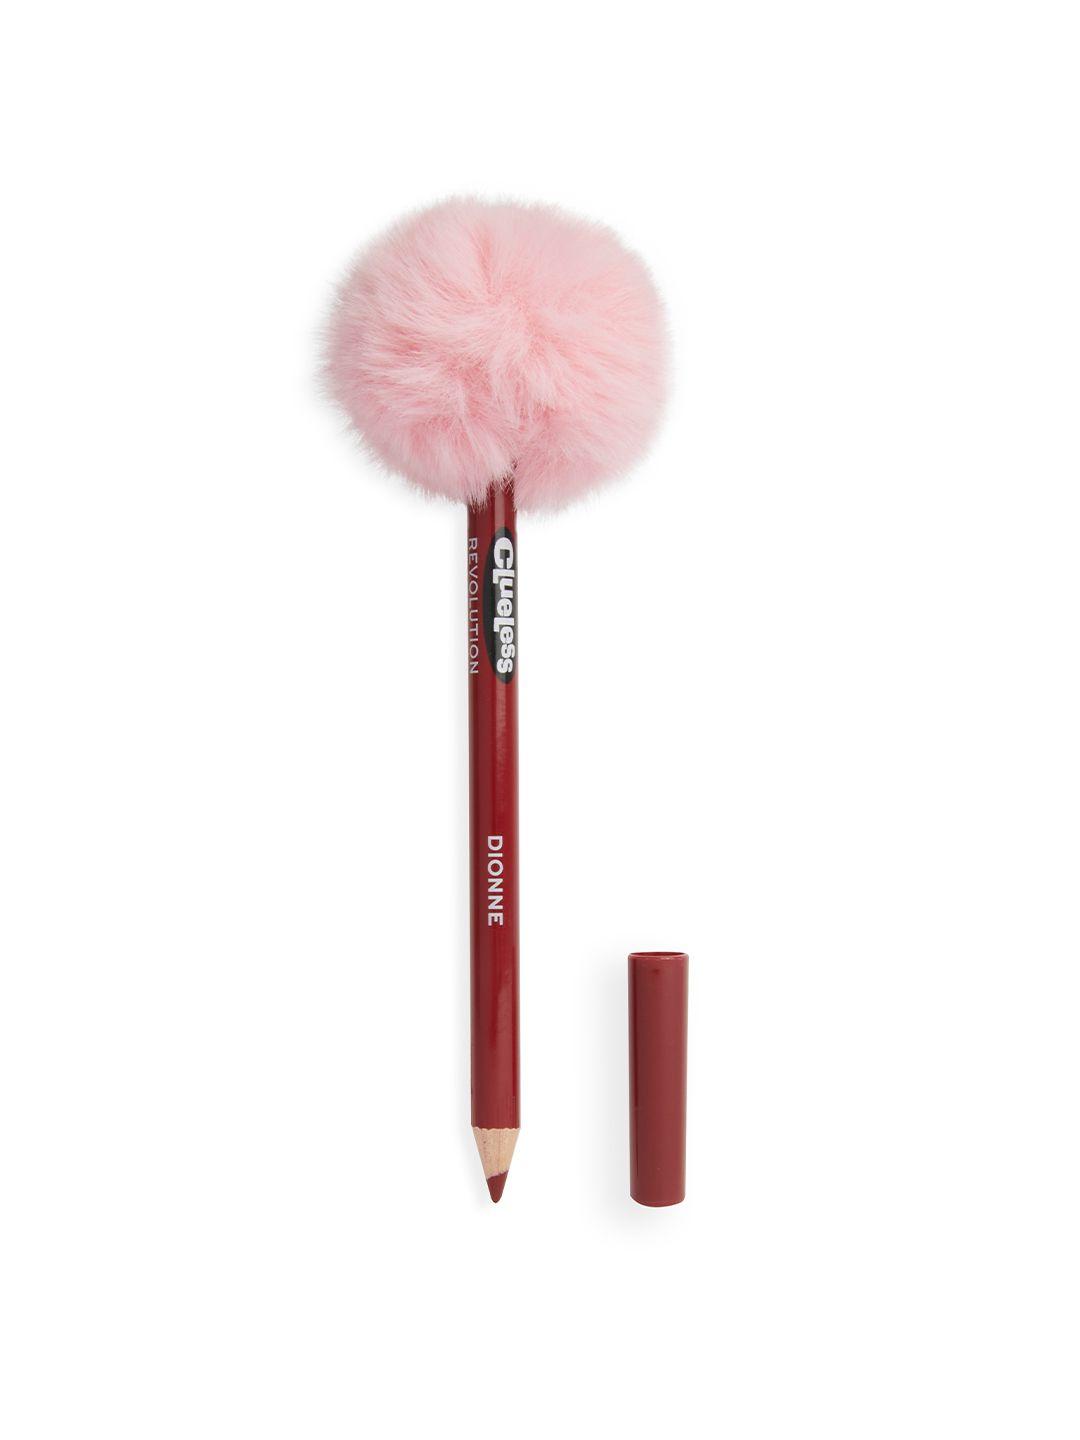 makeup revolution london x clueless lip liner with pom-pom top - dionne